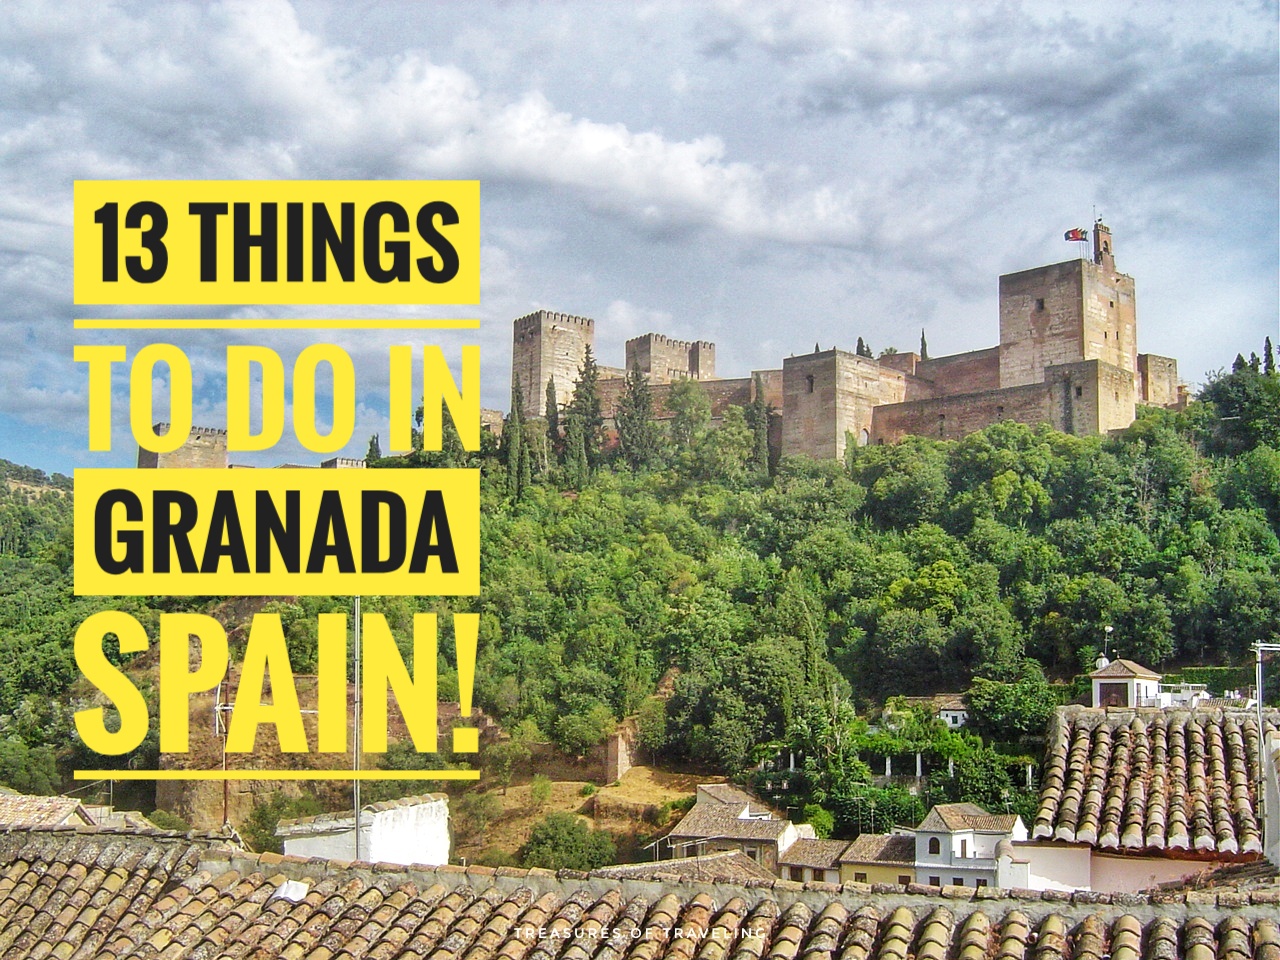 No visit to the south of Spain is complete until you have visited Granada, one of Andalusia’s most unique cities. It has such an interesting history with many years of Arabic and Muslim influence, that you just can’t help but fall in love with it. Here are 13 things to do in and around Granada. There is just no other city like it and that’s why it’s one of the many treasures of traveling through Andalusia and southern Spain.